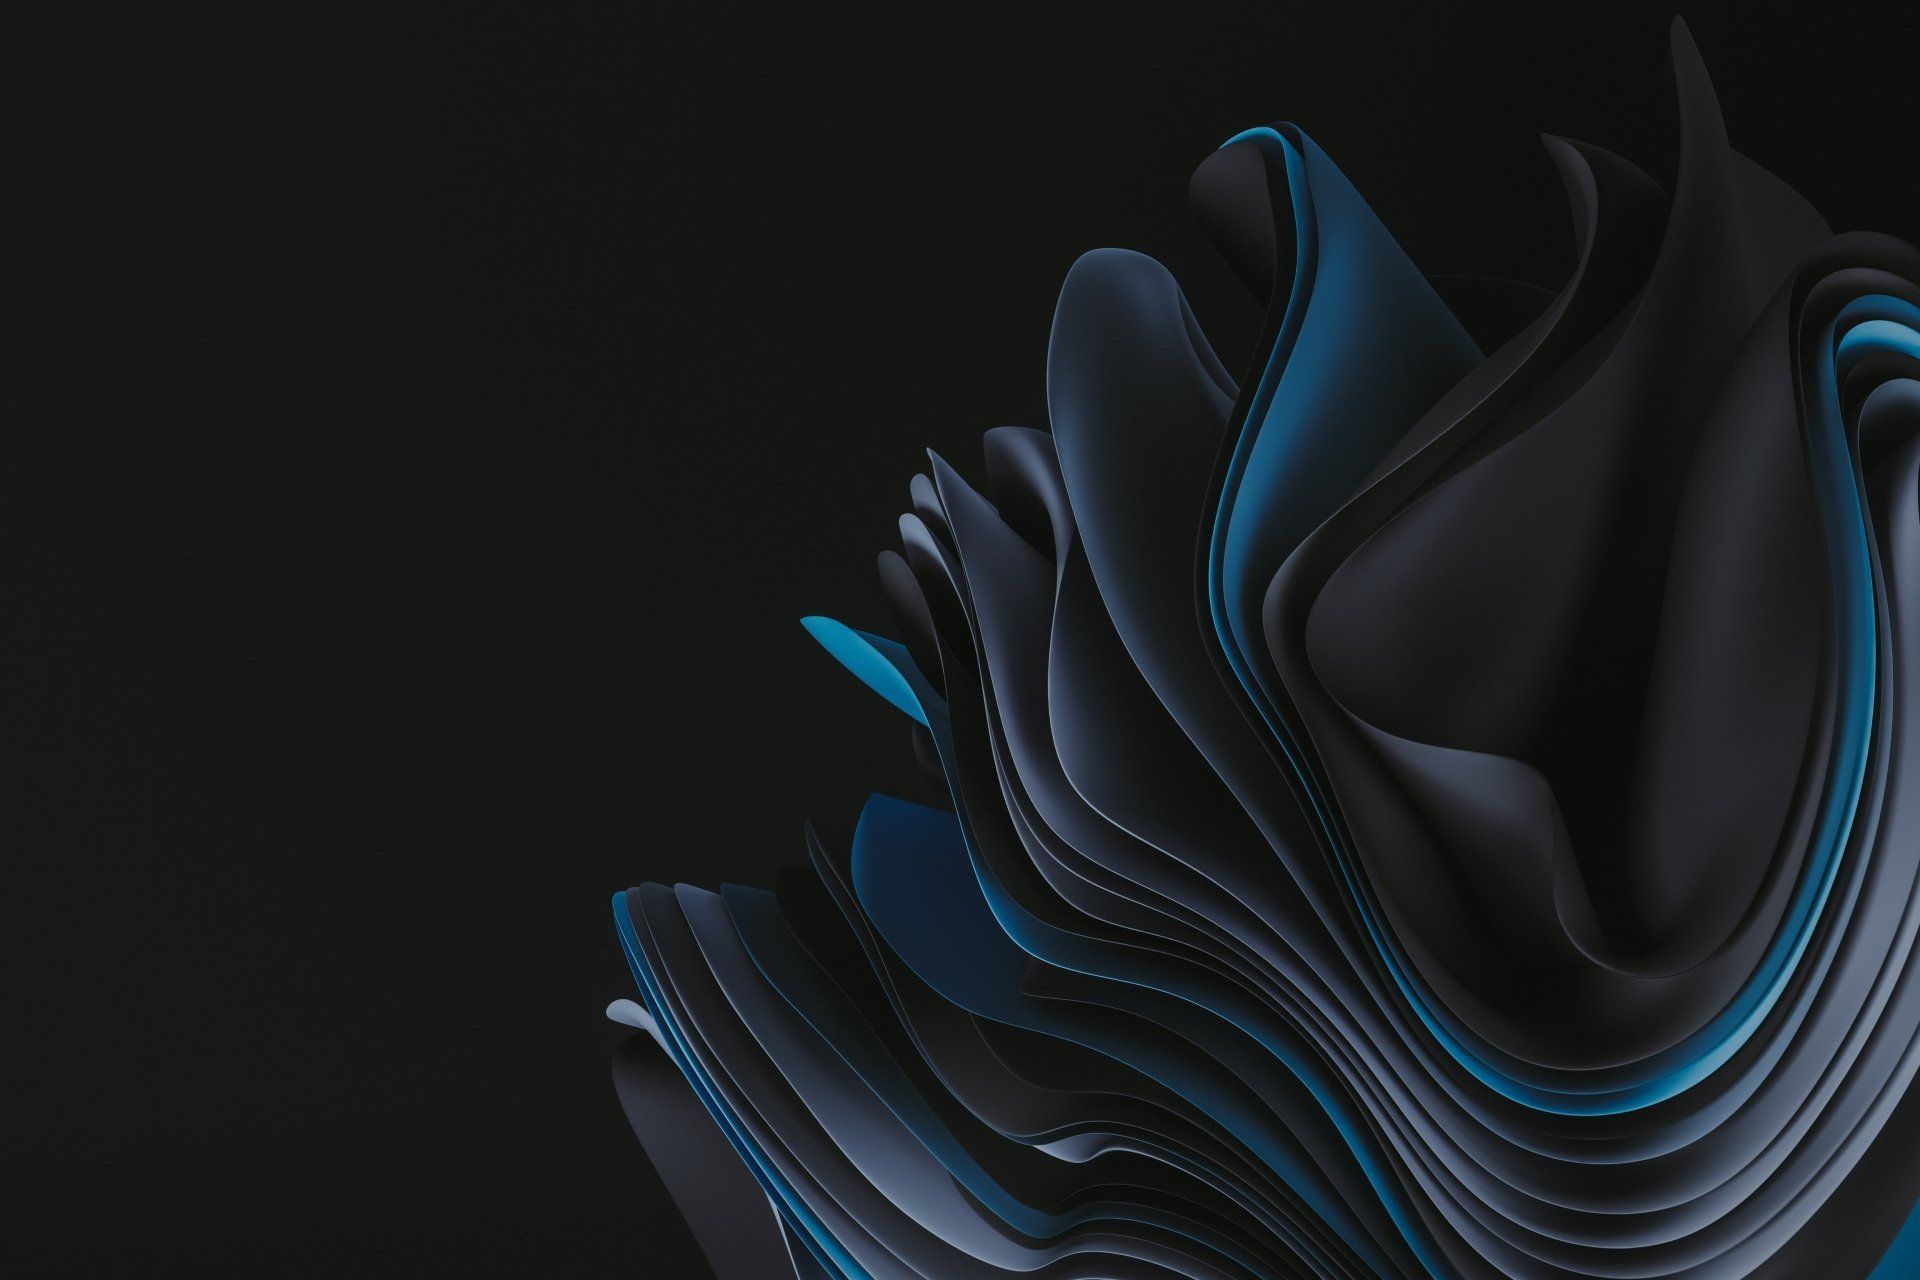 A 3D render of abstract blue and black shapes against a black background - Windows 11